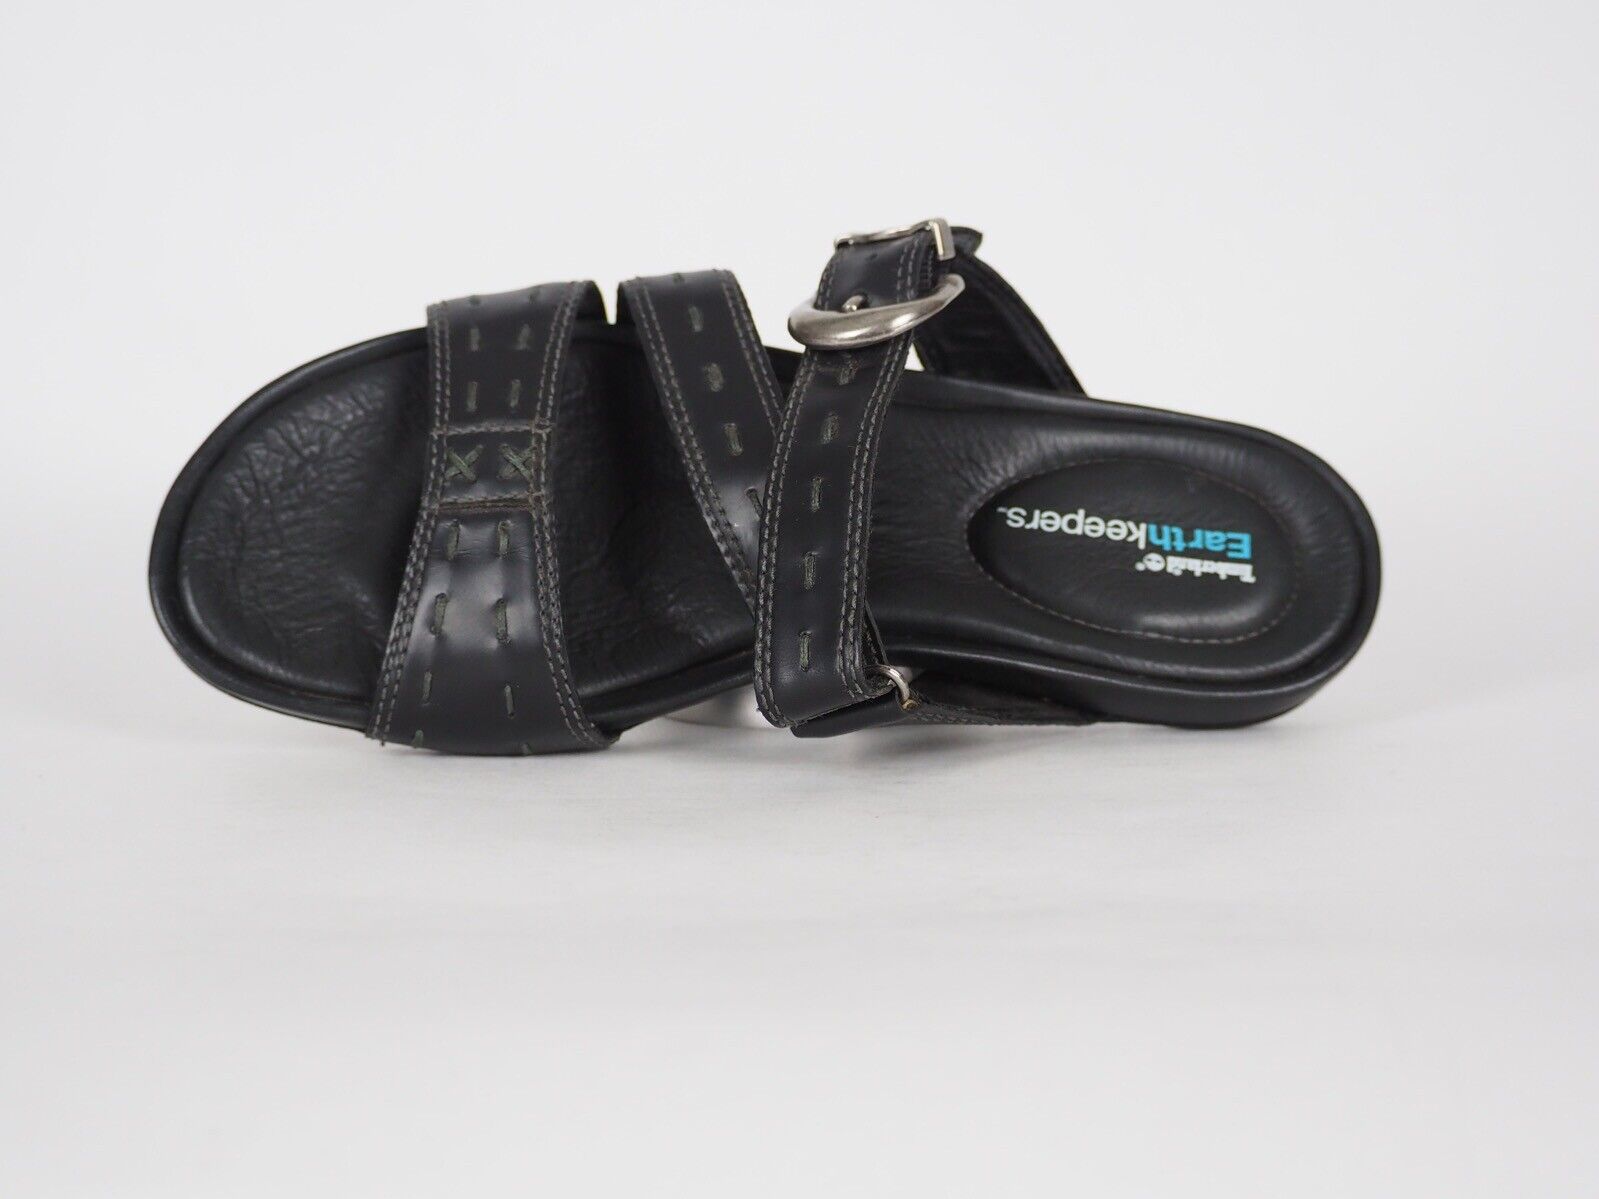 Womens Timberland Pleasant Bay 25636 Black Leather Slippers Summer Flip Flops - London Top Style